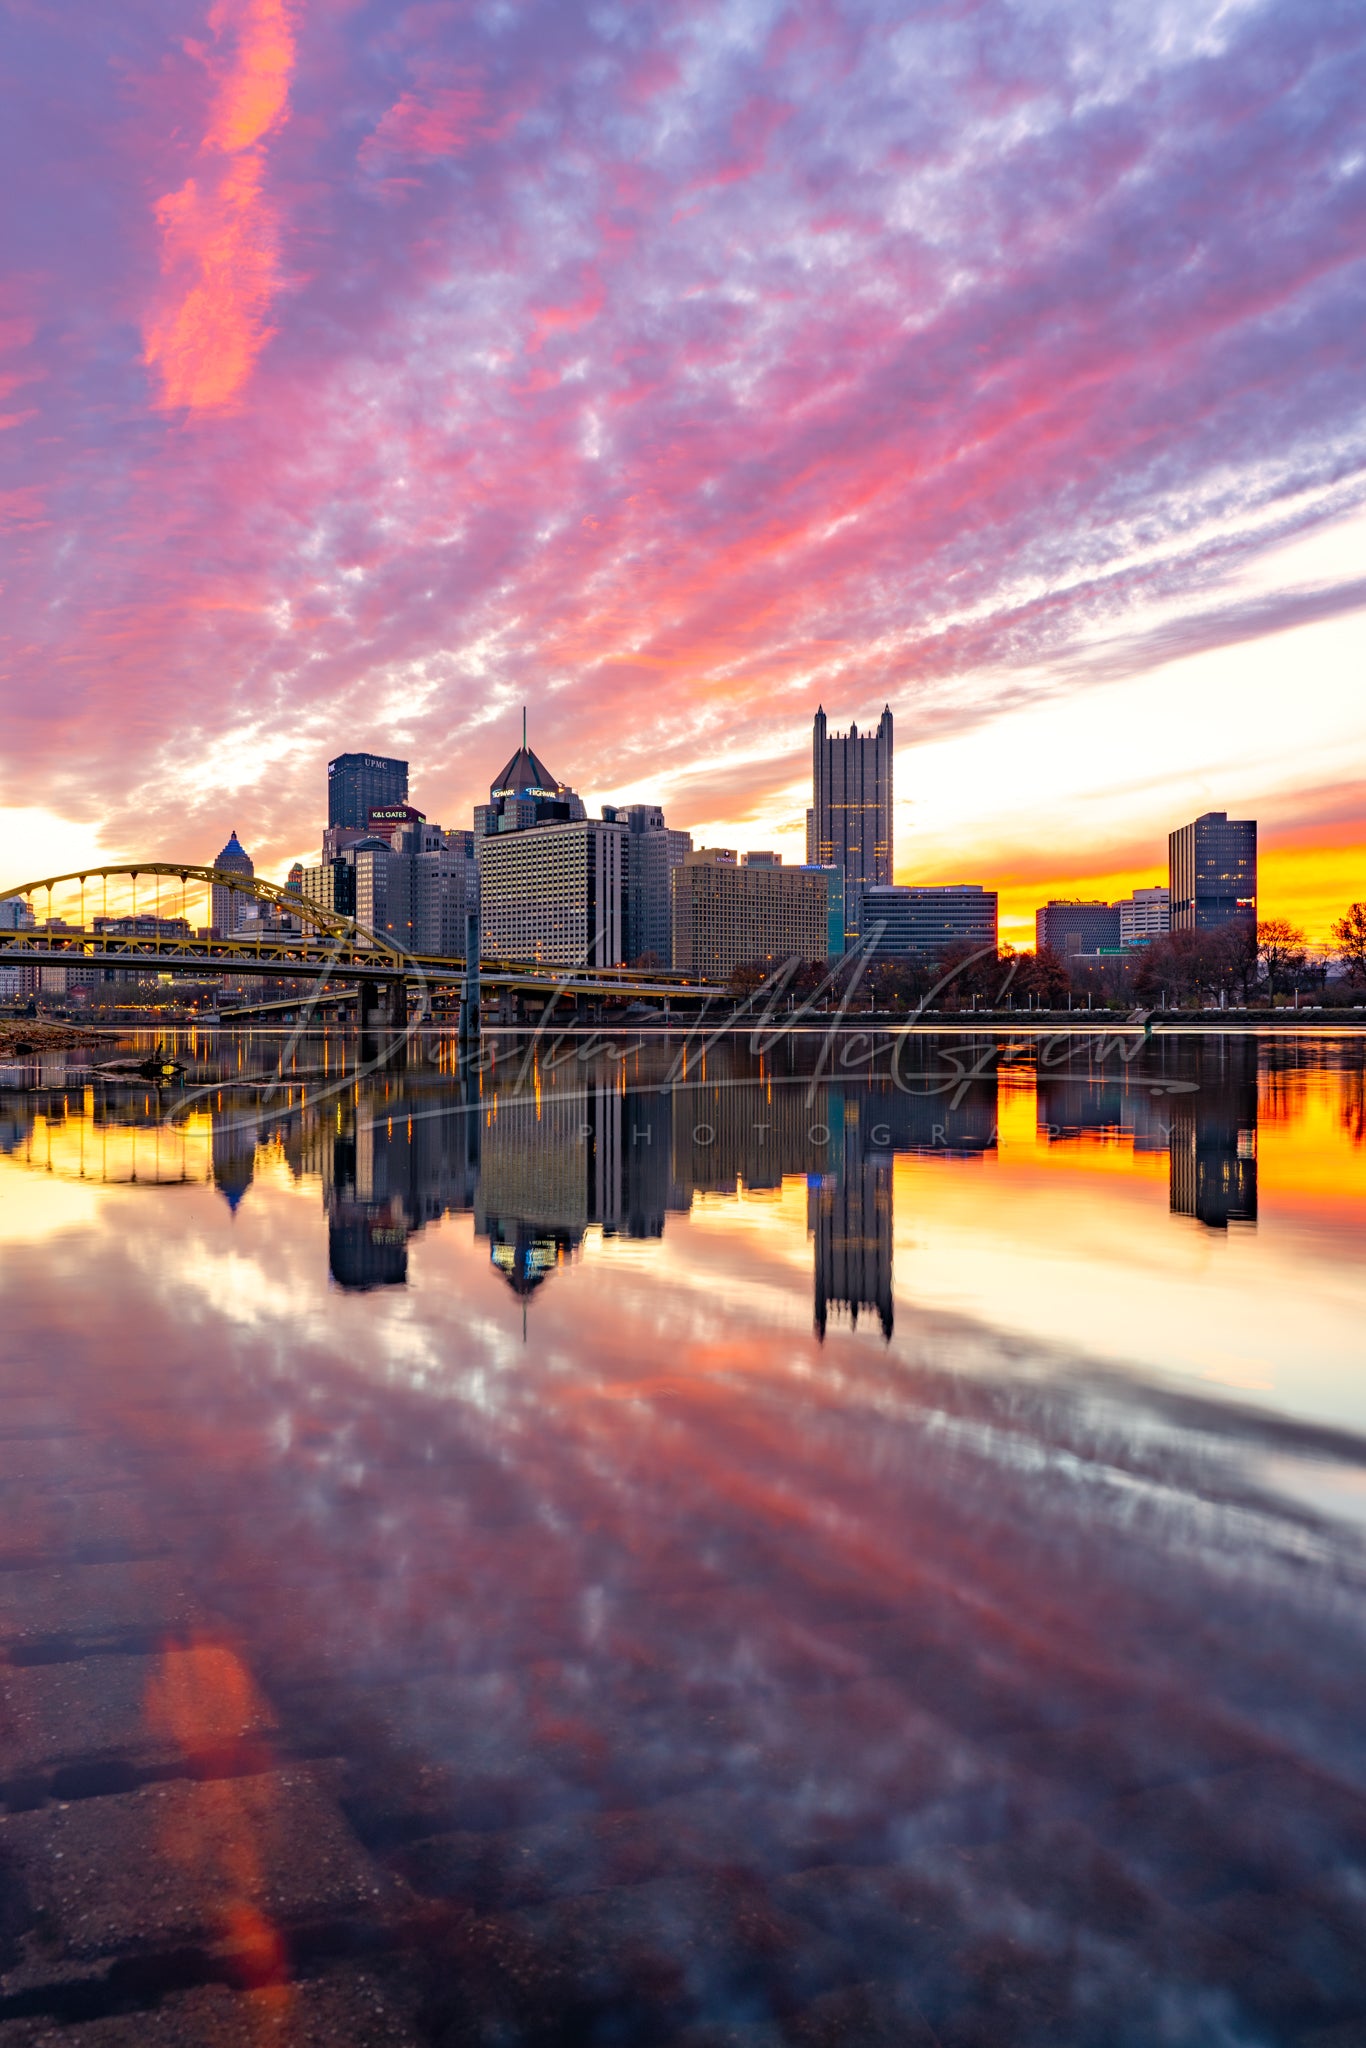 An Incredible Sunrise From Pittsburgh's North Shore